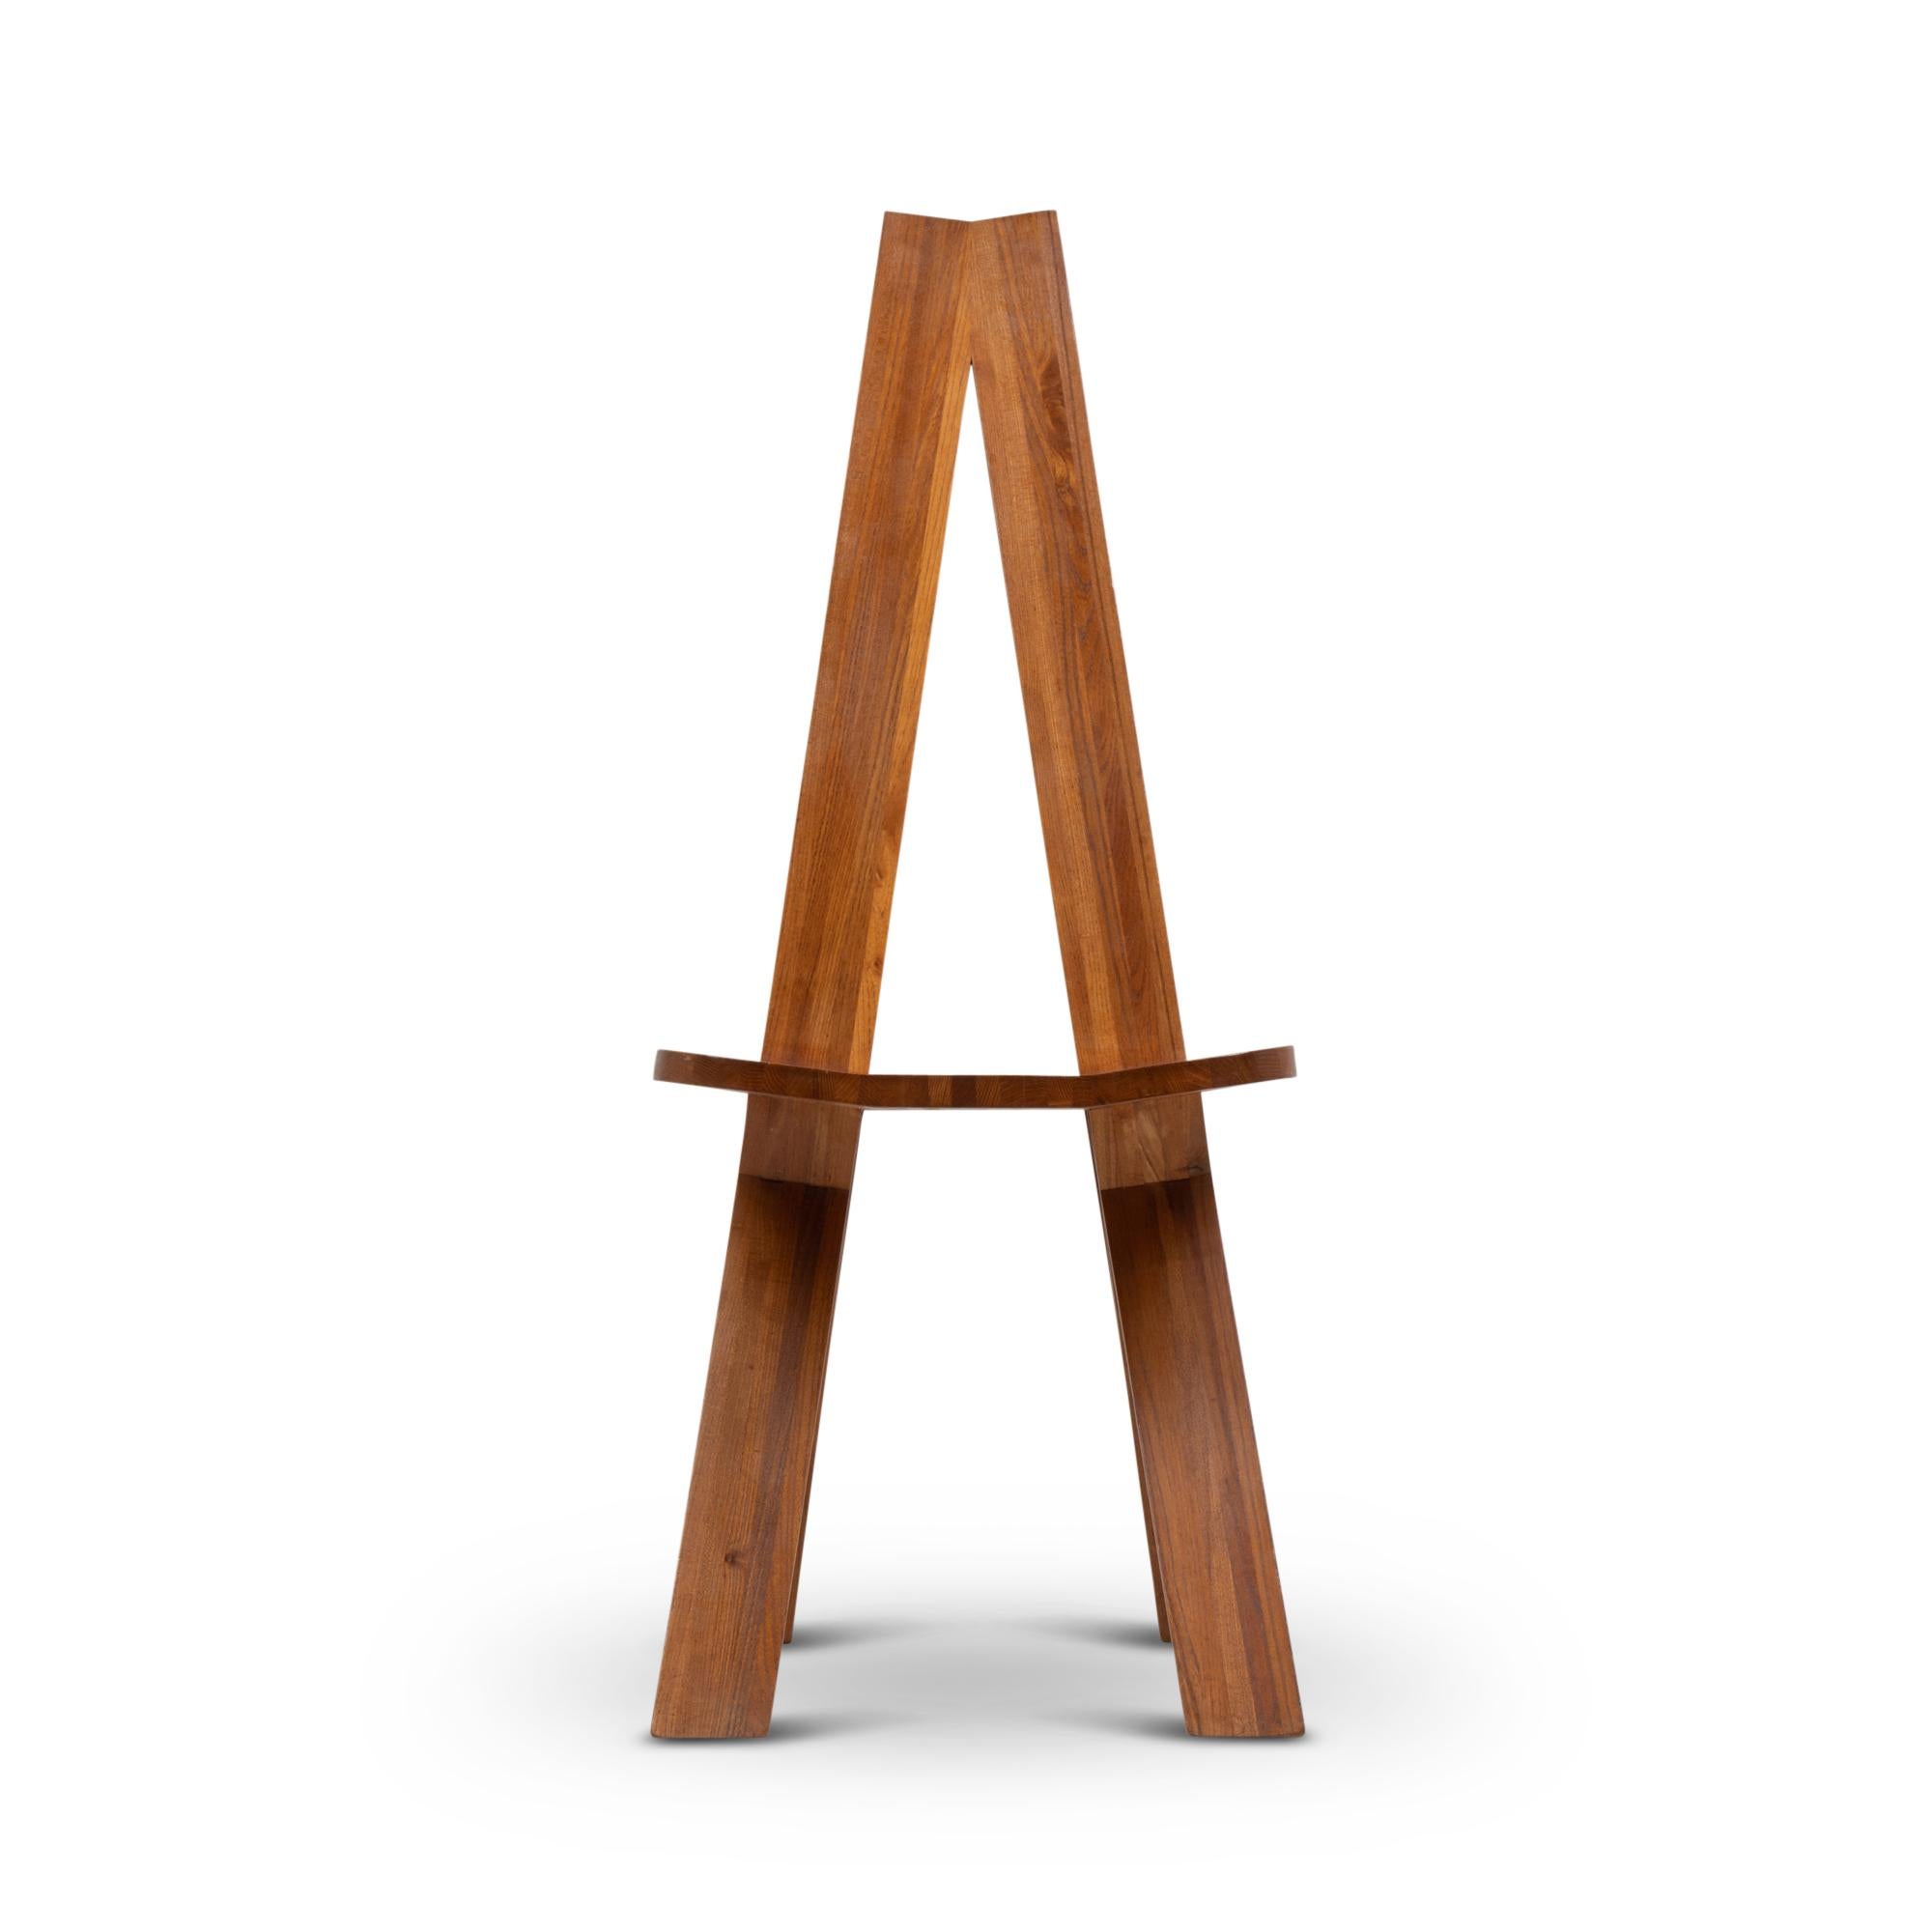 Pierre Chapo, by.

Chair in blond solid elm, model S45 or 